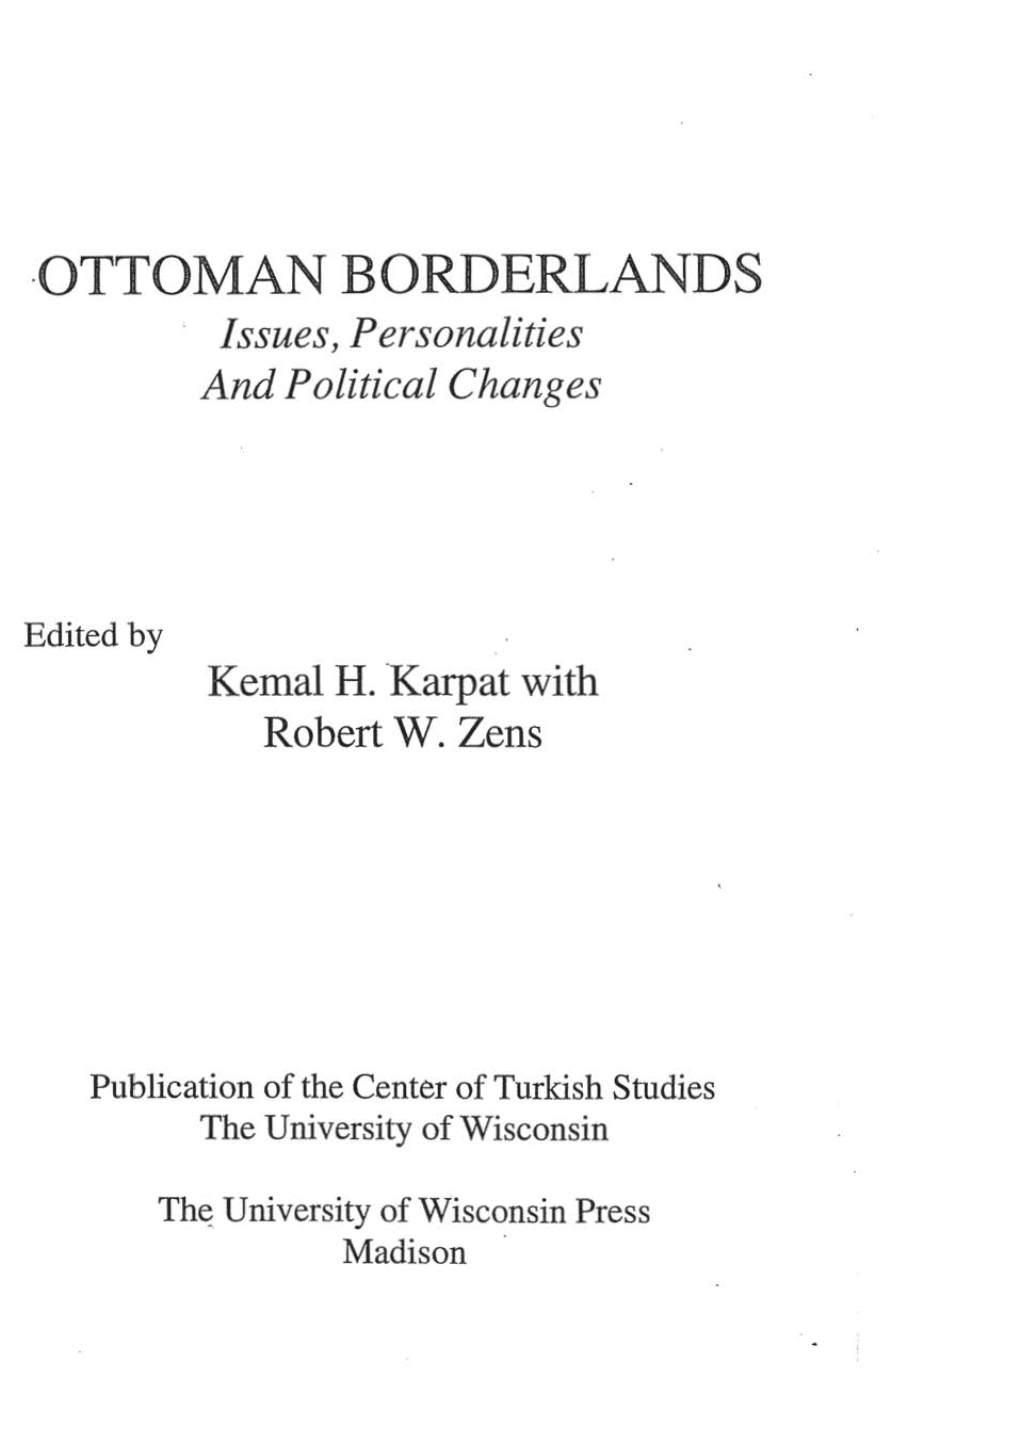 ·OTTOMAN BORDERLANDS Issues, Personalities and Political Changes